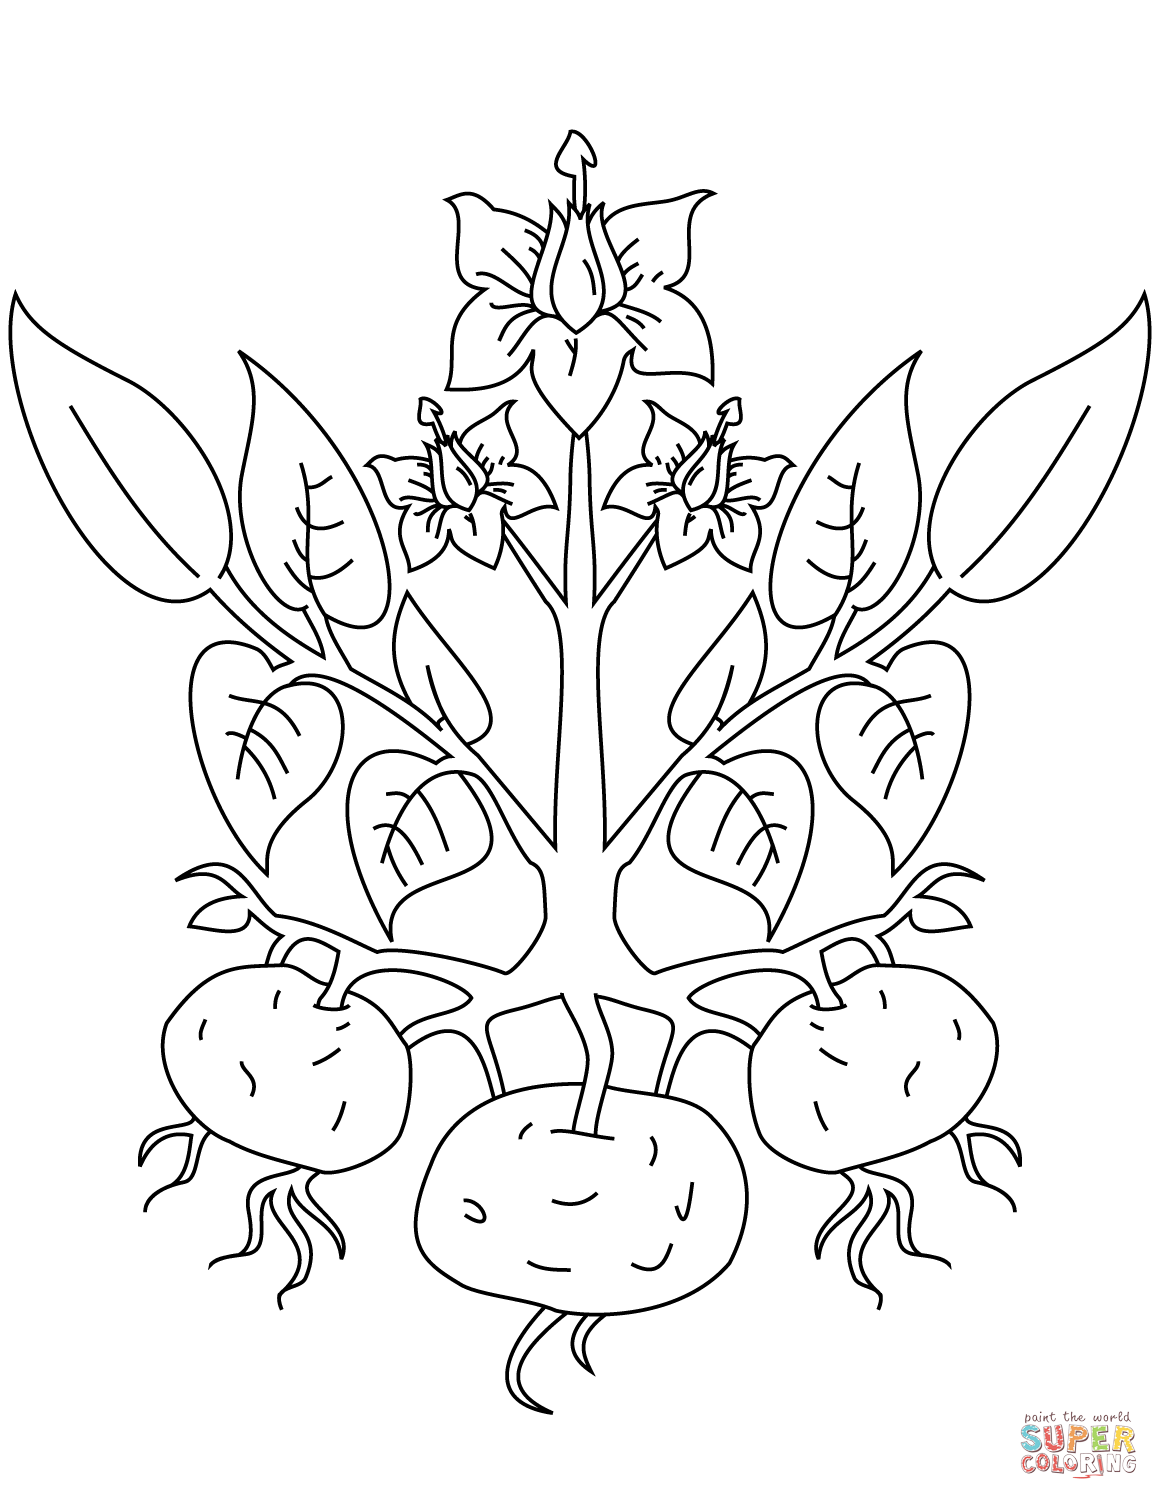 Potato Plant coloring page | Free Printable Coloring Pages